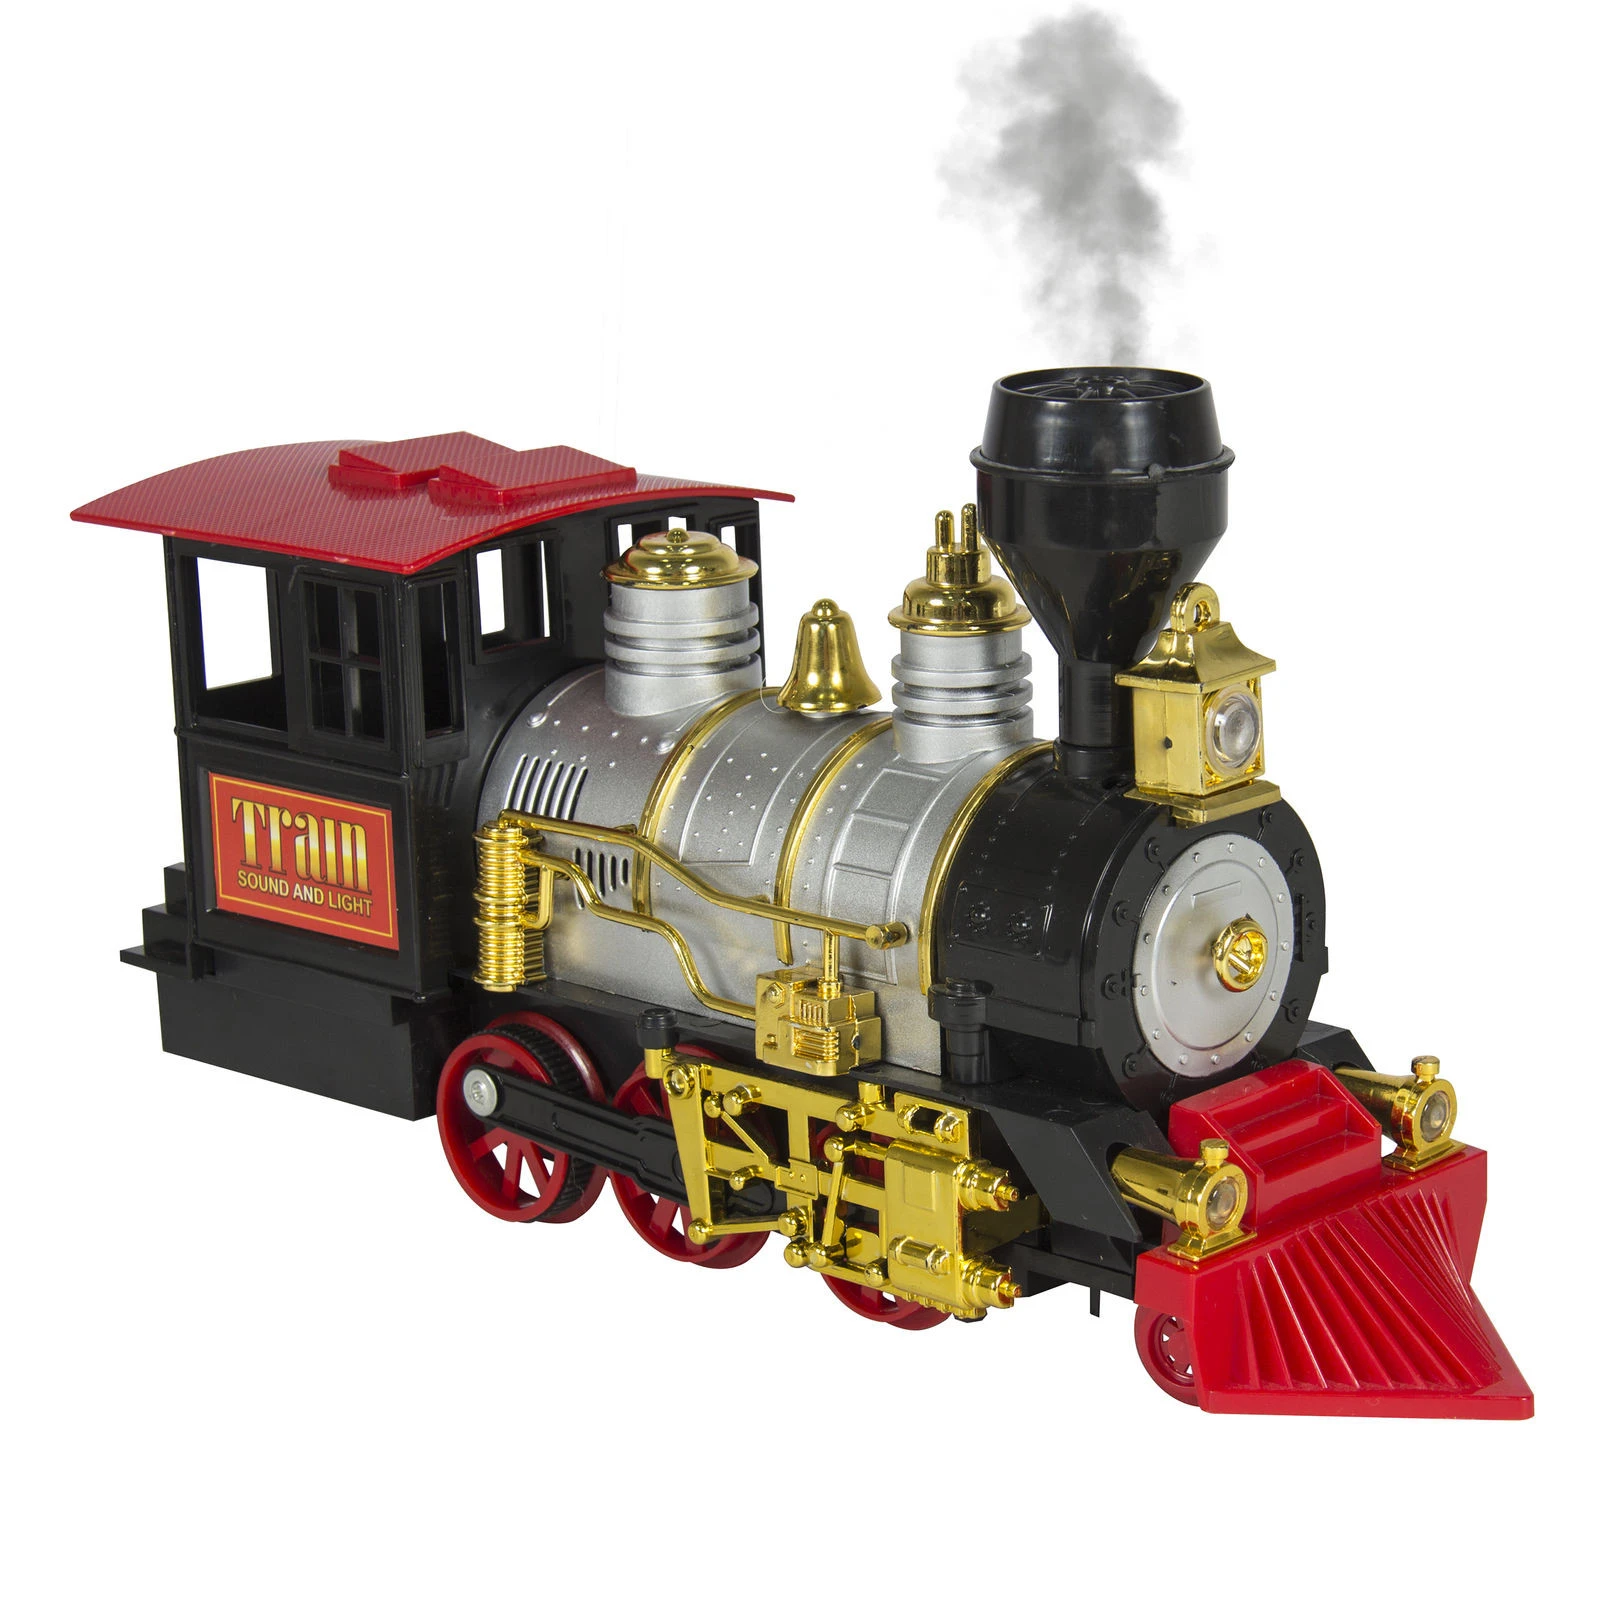 Classic Holiday Christmas Train Set with Real Smoke,Authentic Lights, and Sounds - A Full Set with Locomotive Engine